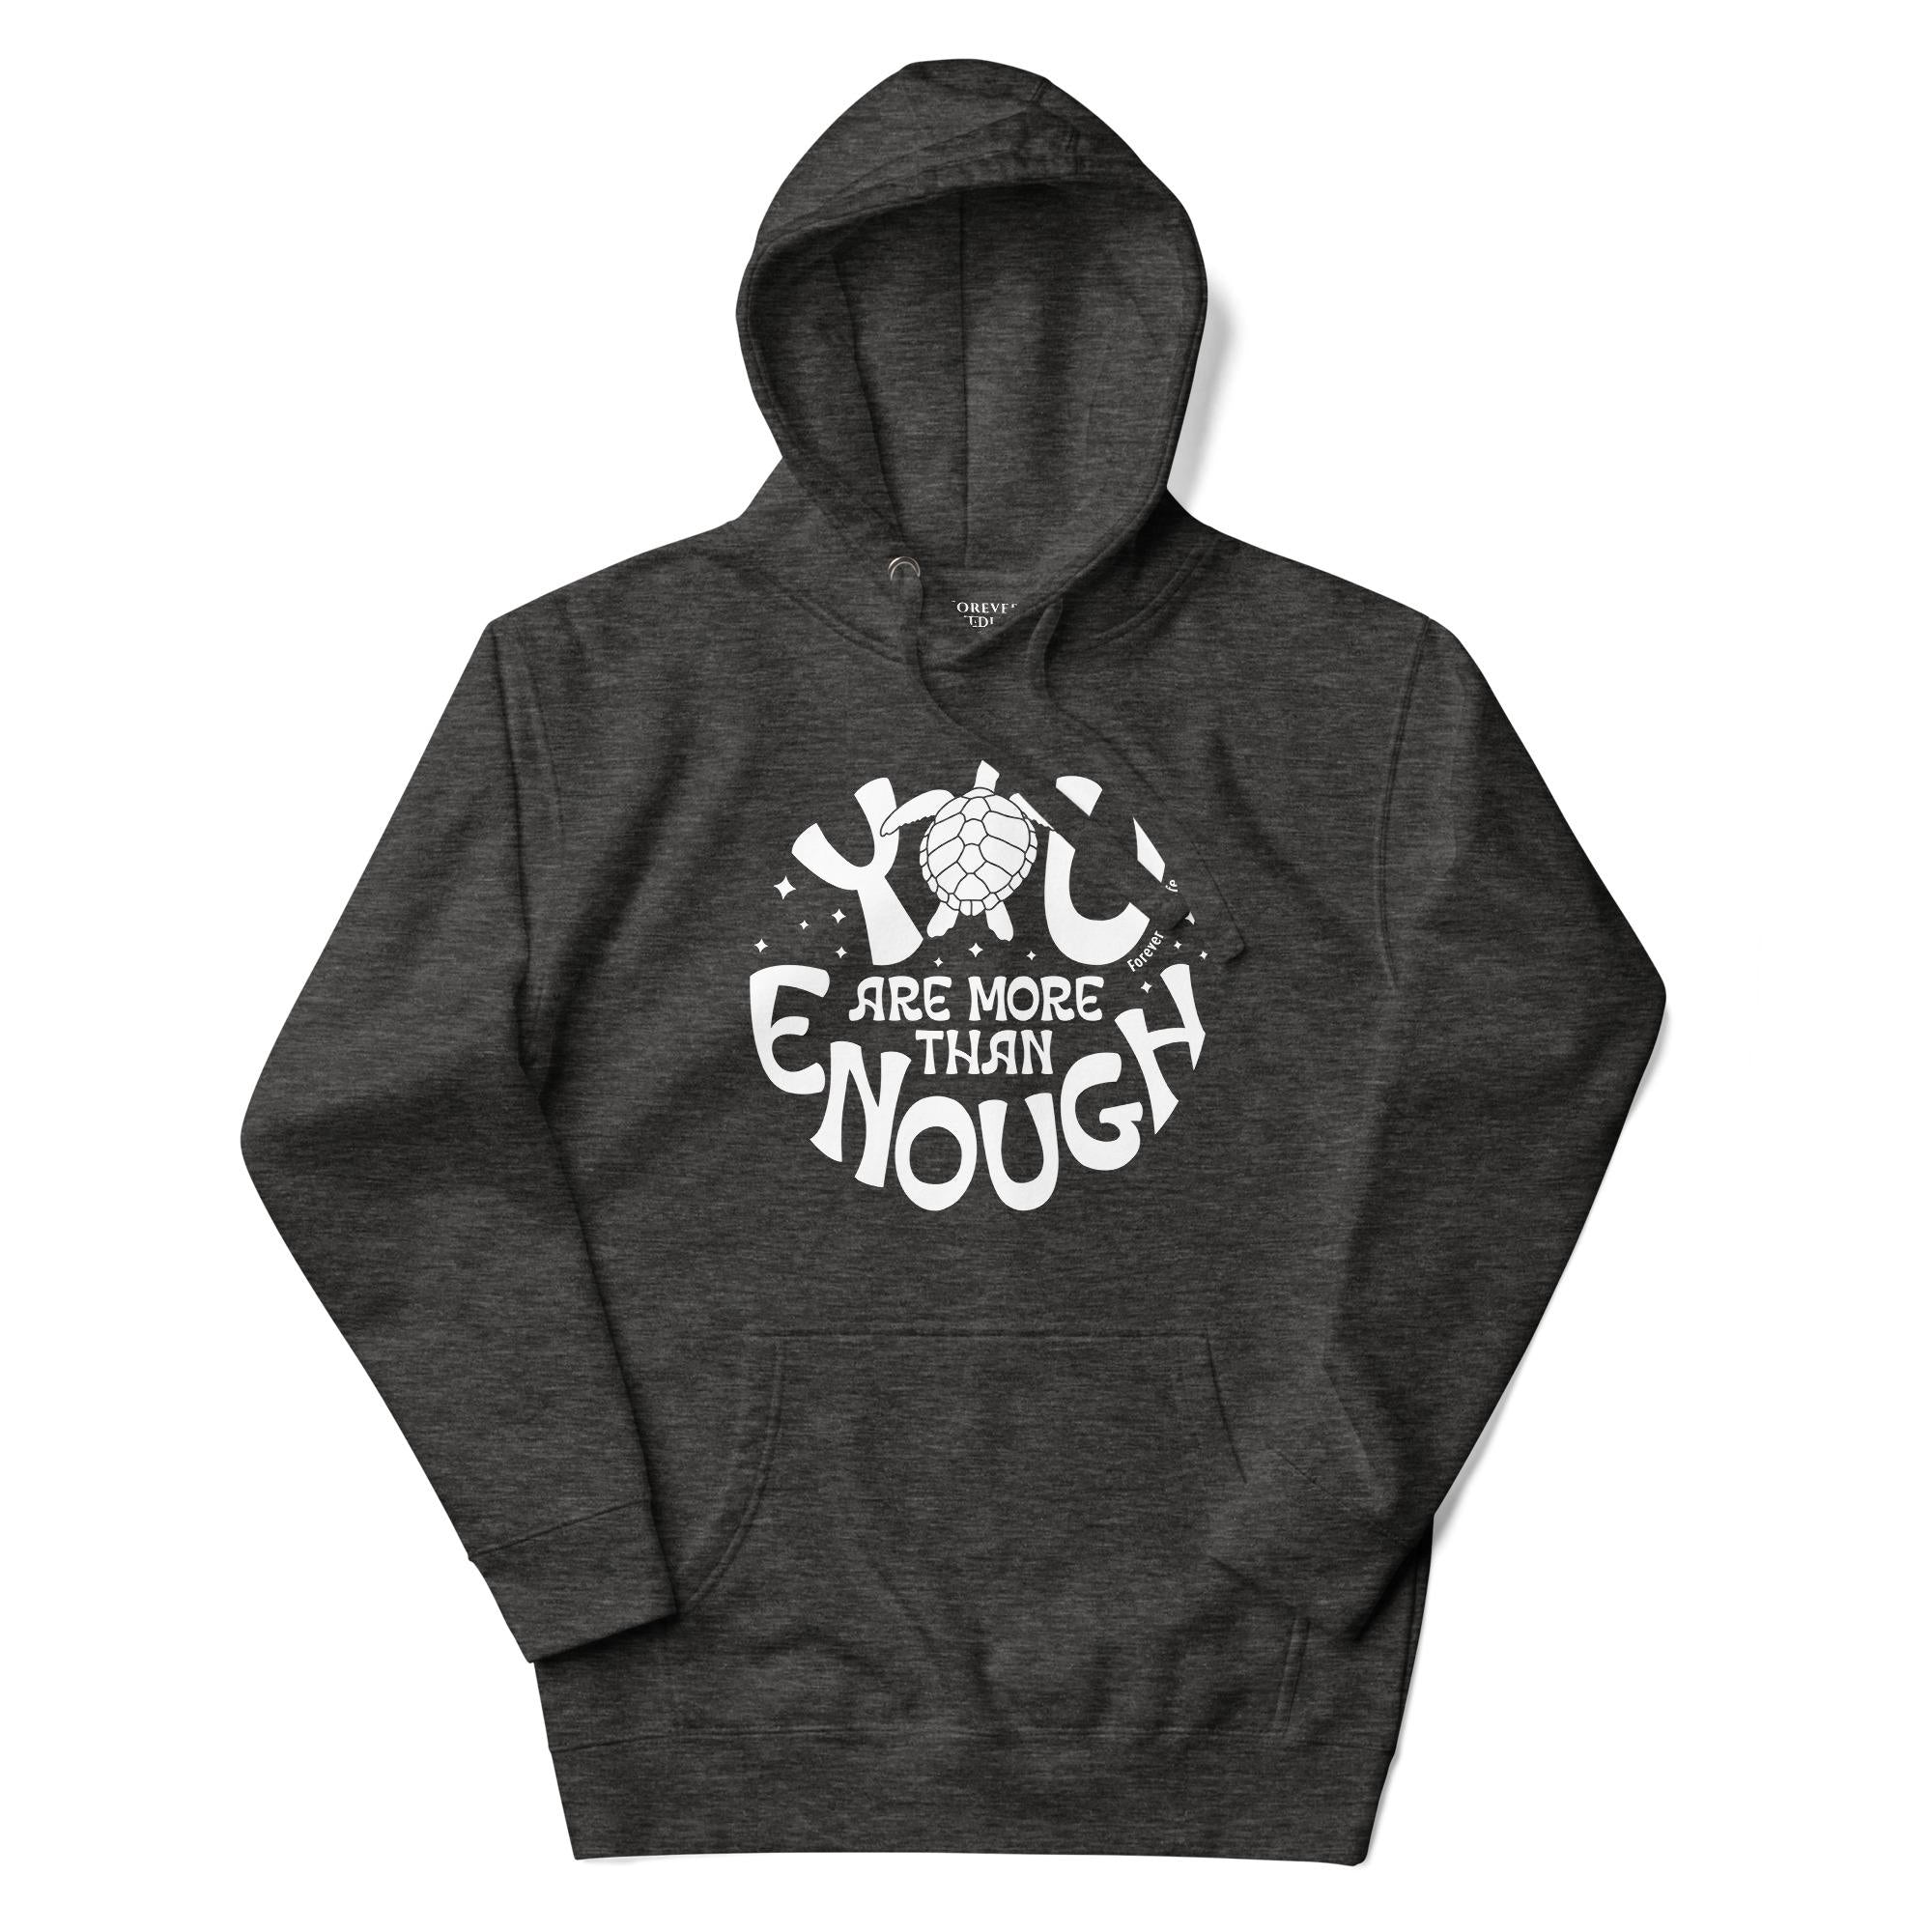 Sea Turtle Hoodie in Charcoal – Premium Wildlife Animal Inspirational Hoodie Design with YOu Are More Than Enough text, part of Wildlife Hoodies & Clothing from Forever Wildlife